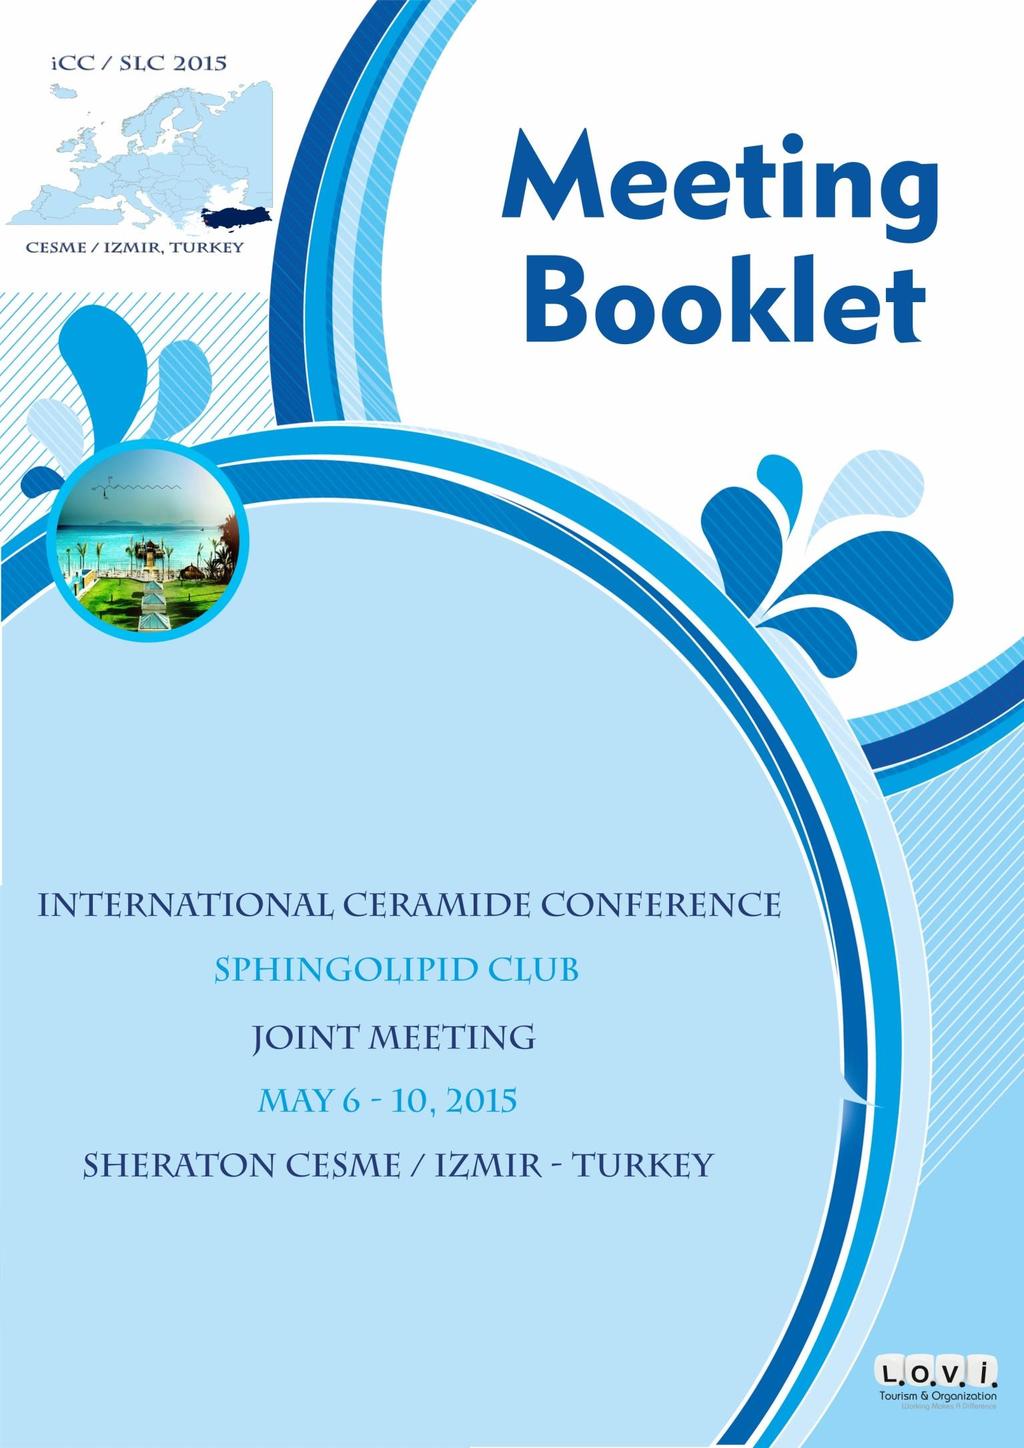 May 6-10, 2015 International Ceramide Conference and